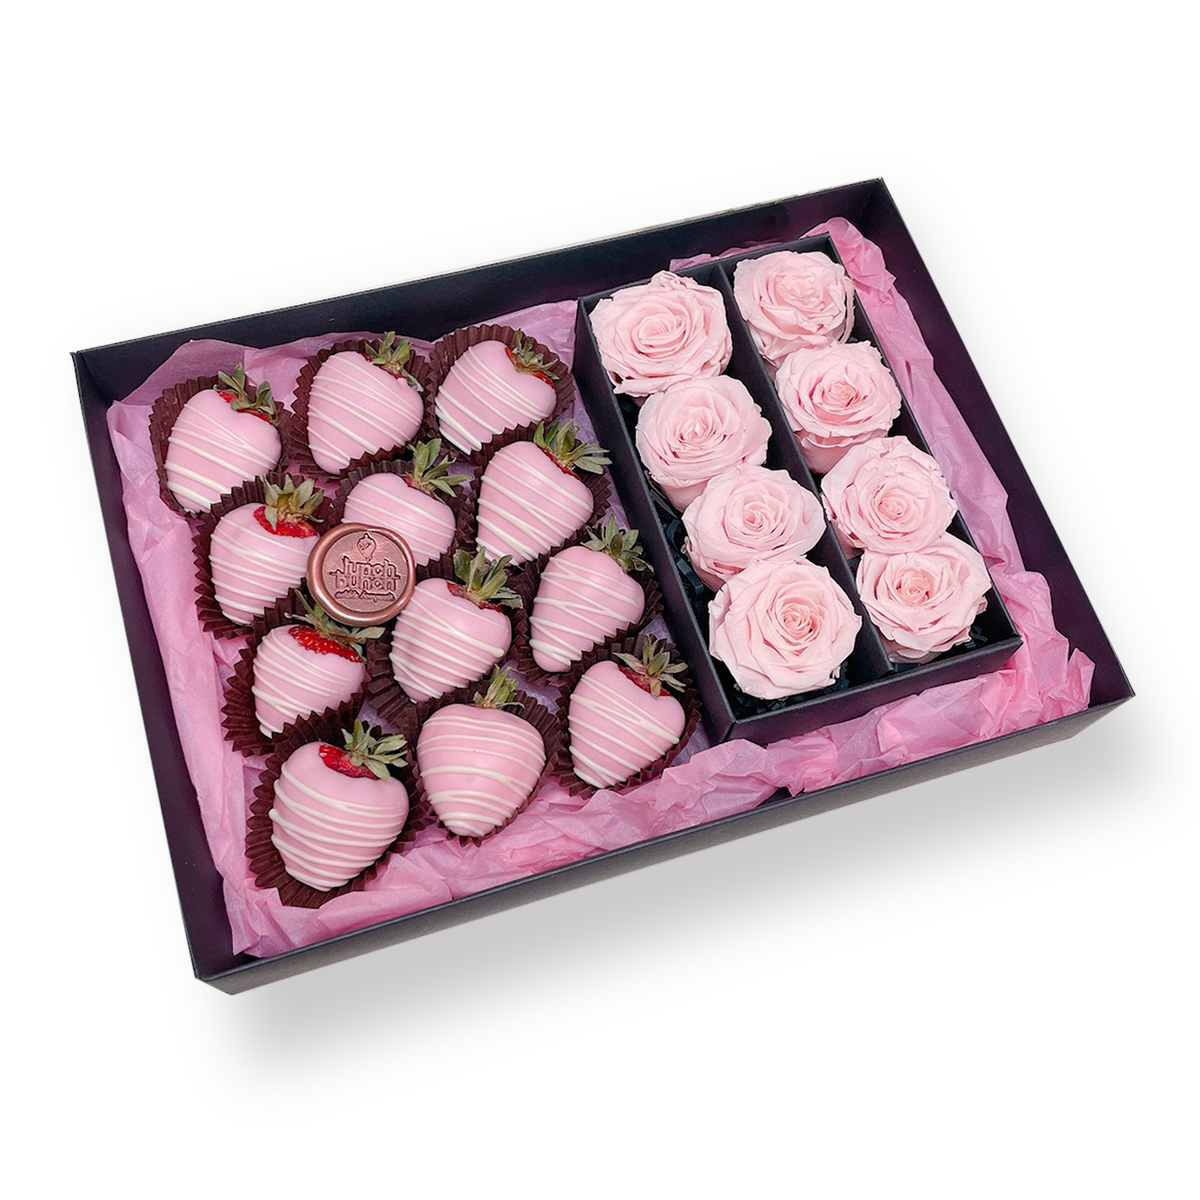 Pink Chocolate Strawberries Preserved Roses Hamper, gifts for her, gift for lady, gift for mum, dessert box delivery 